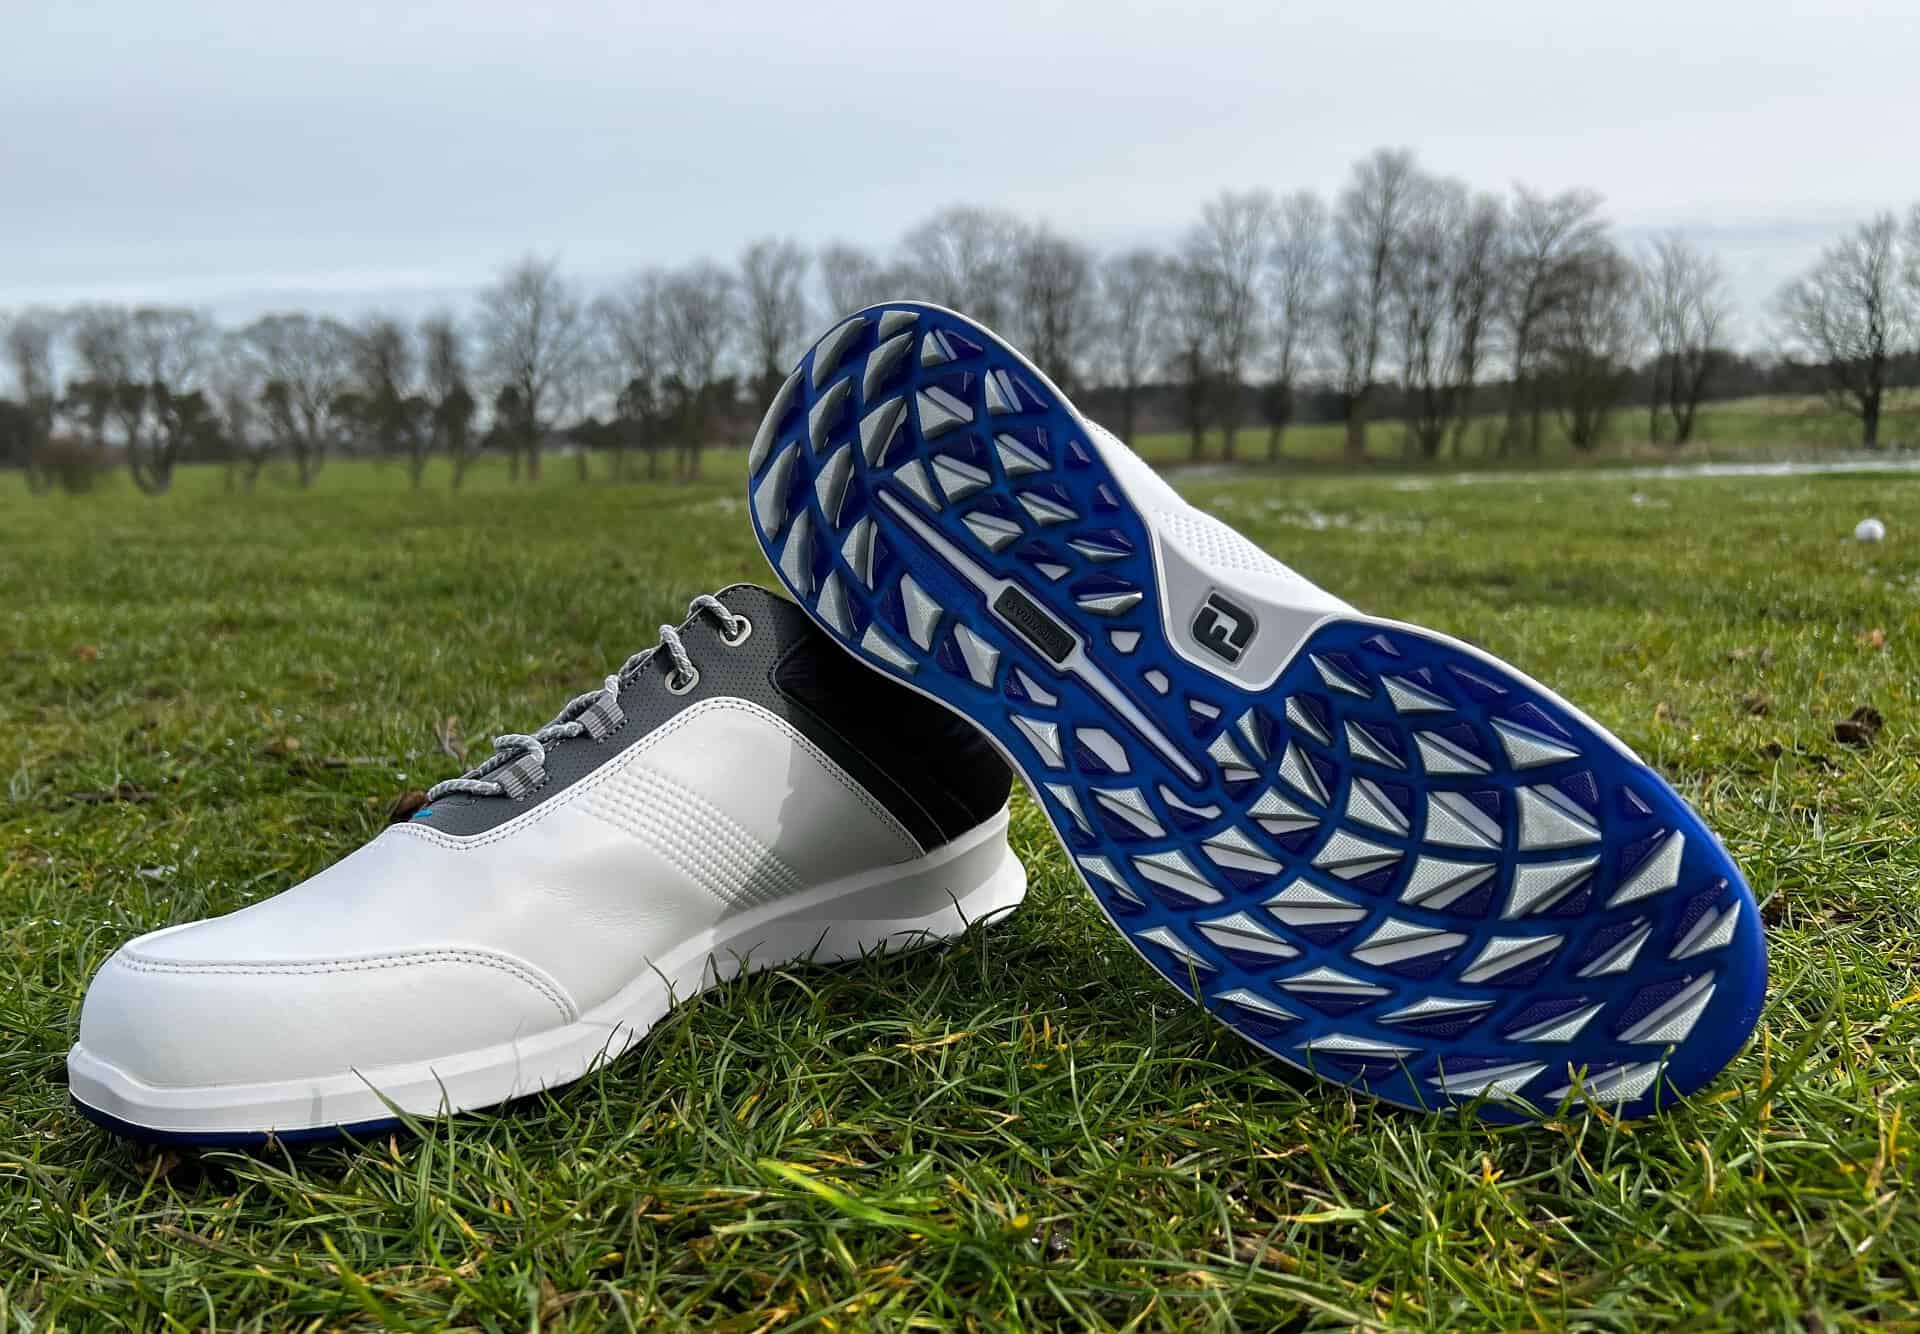 footjoy stratos golf shoes review